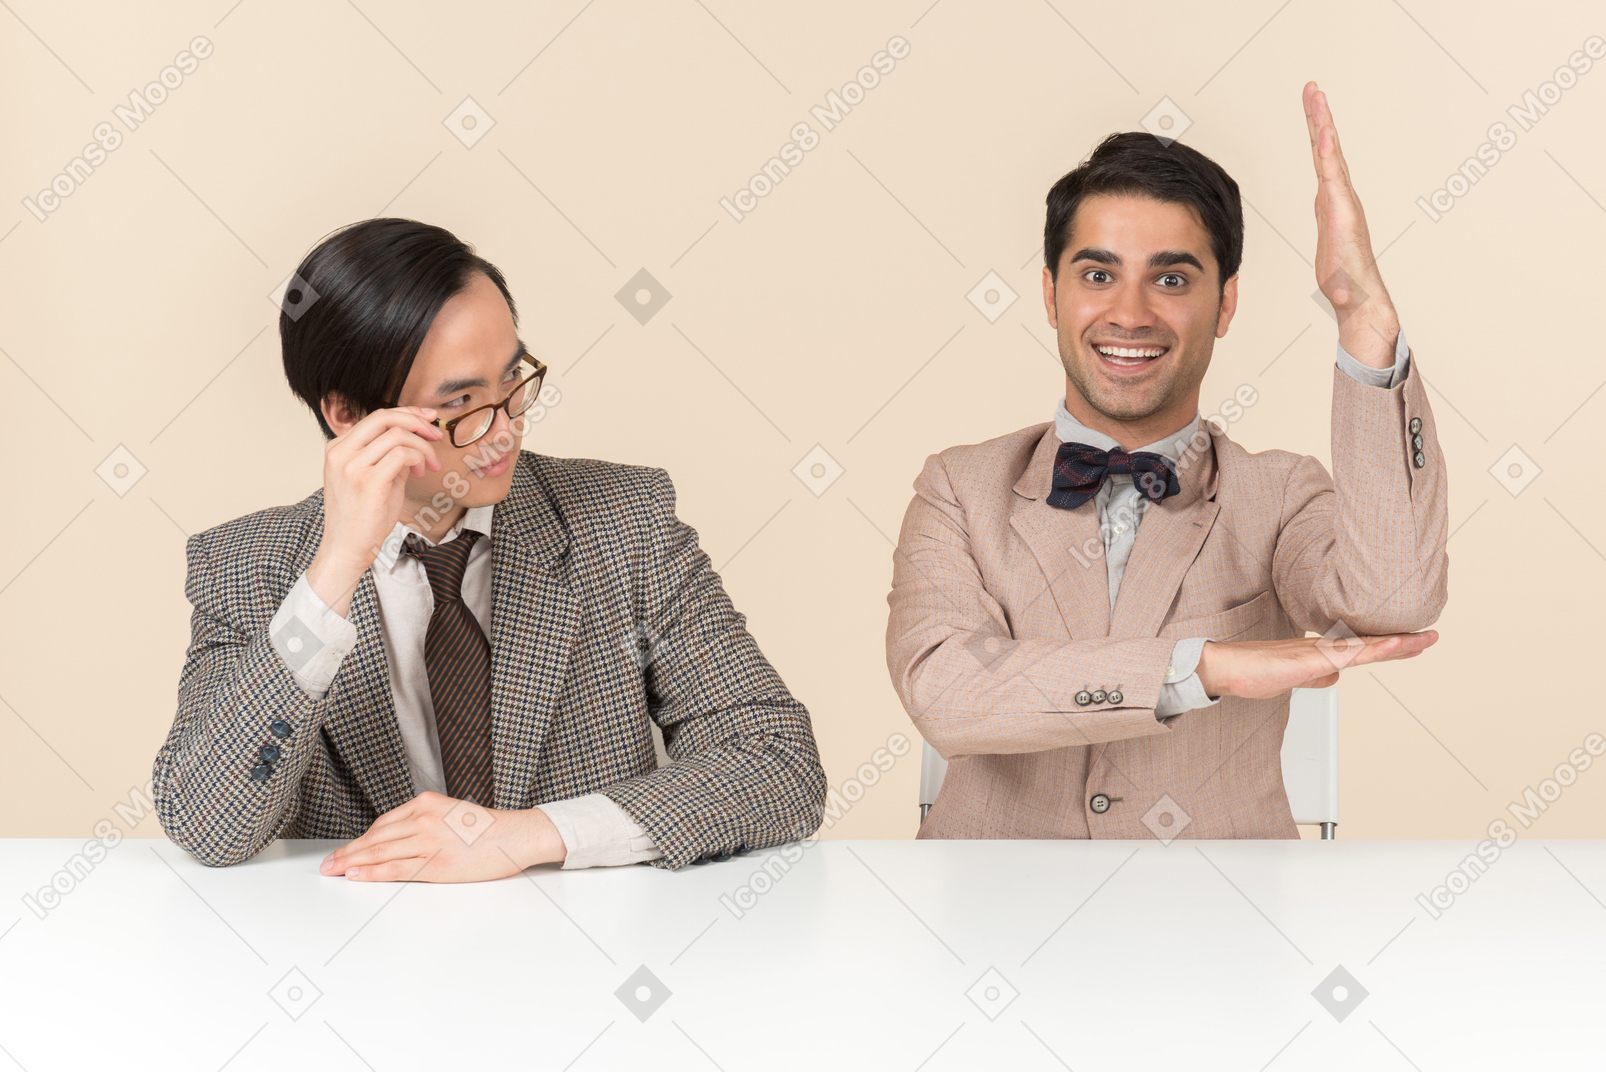 Two young nerds sitting at the table and one of them is raising hand